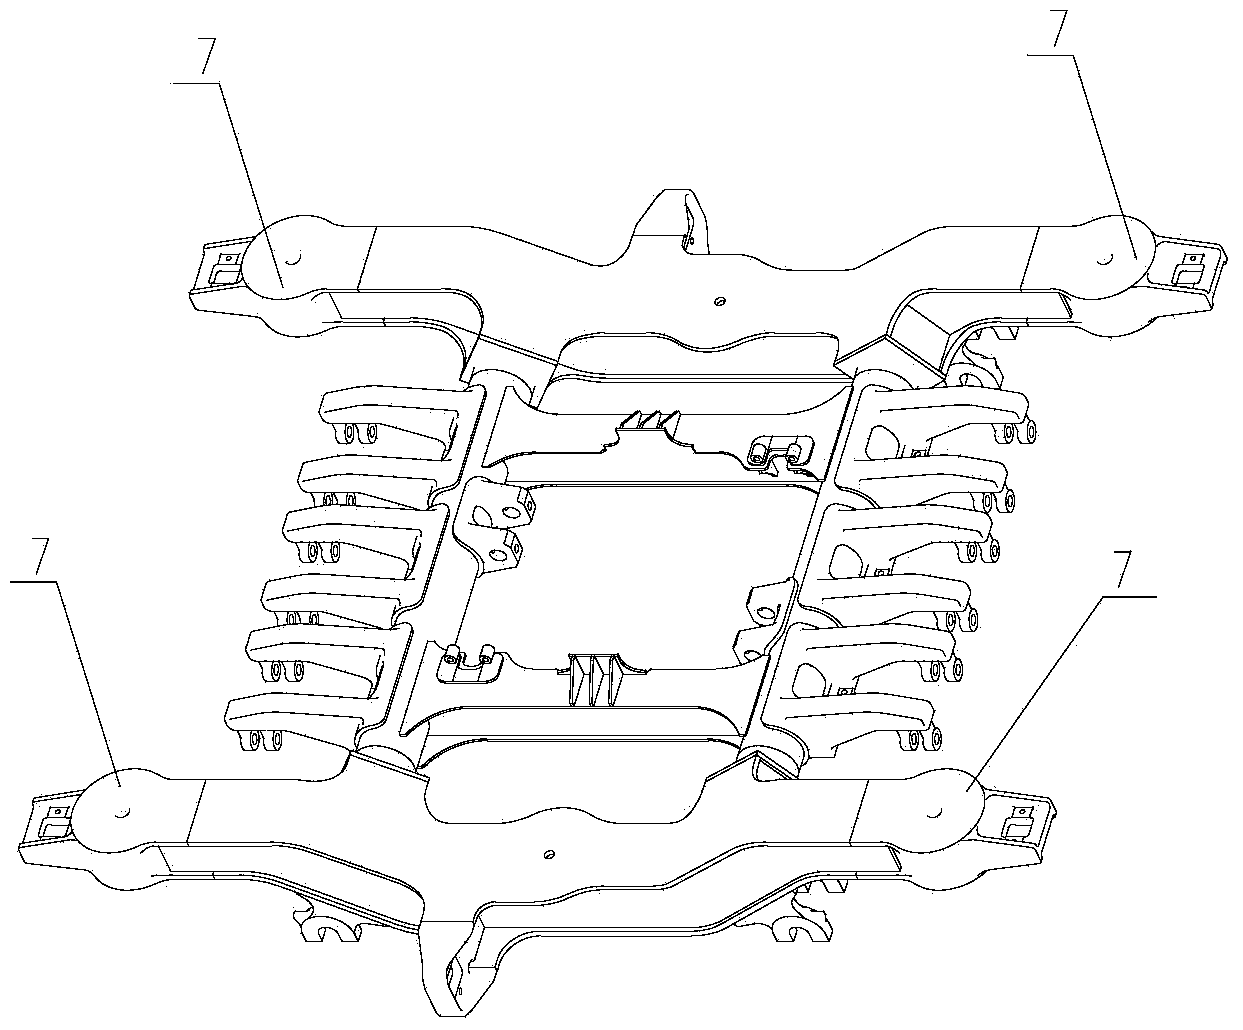 Wagon bogie framework and spring seat thereof